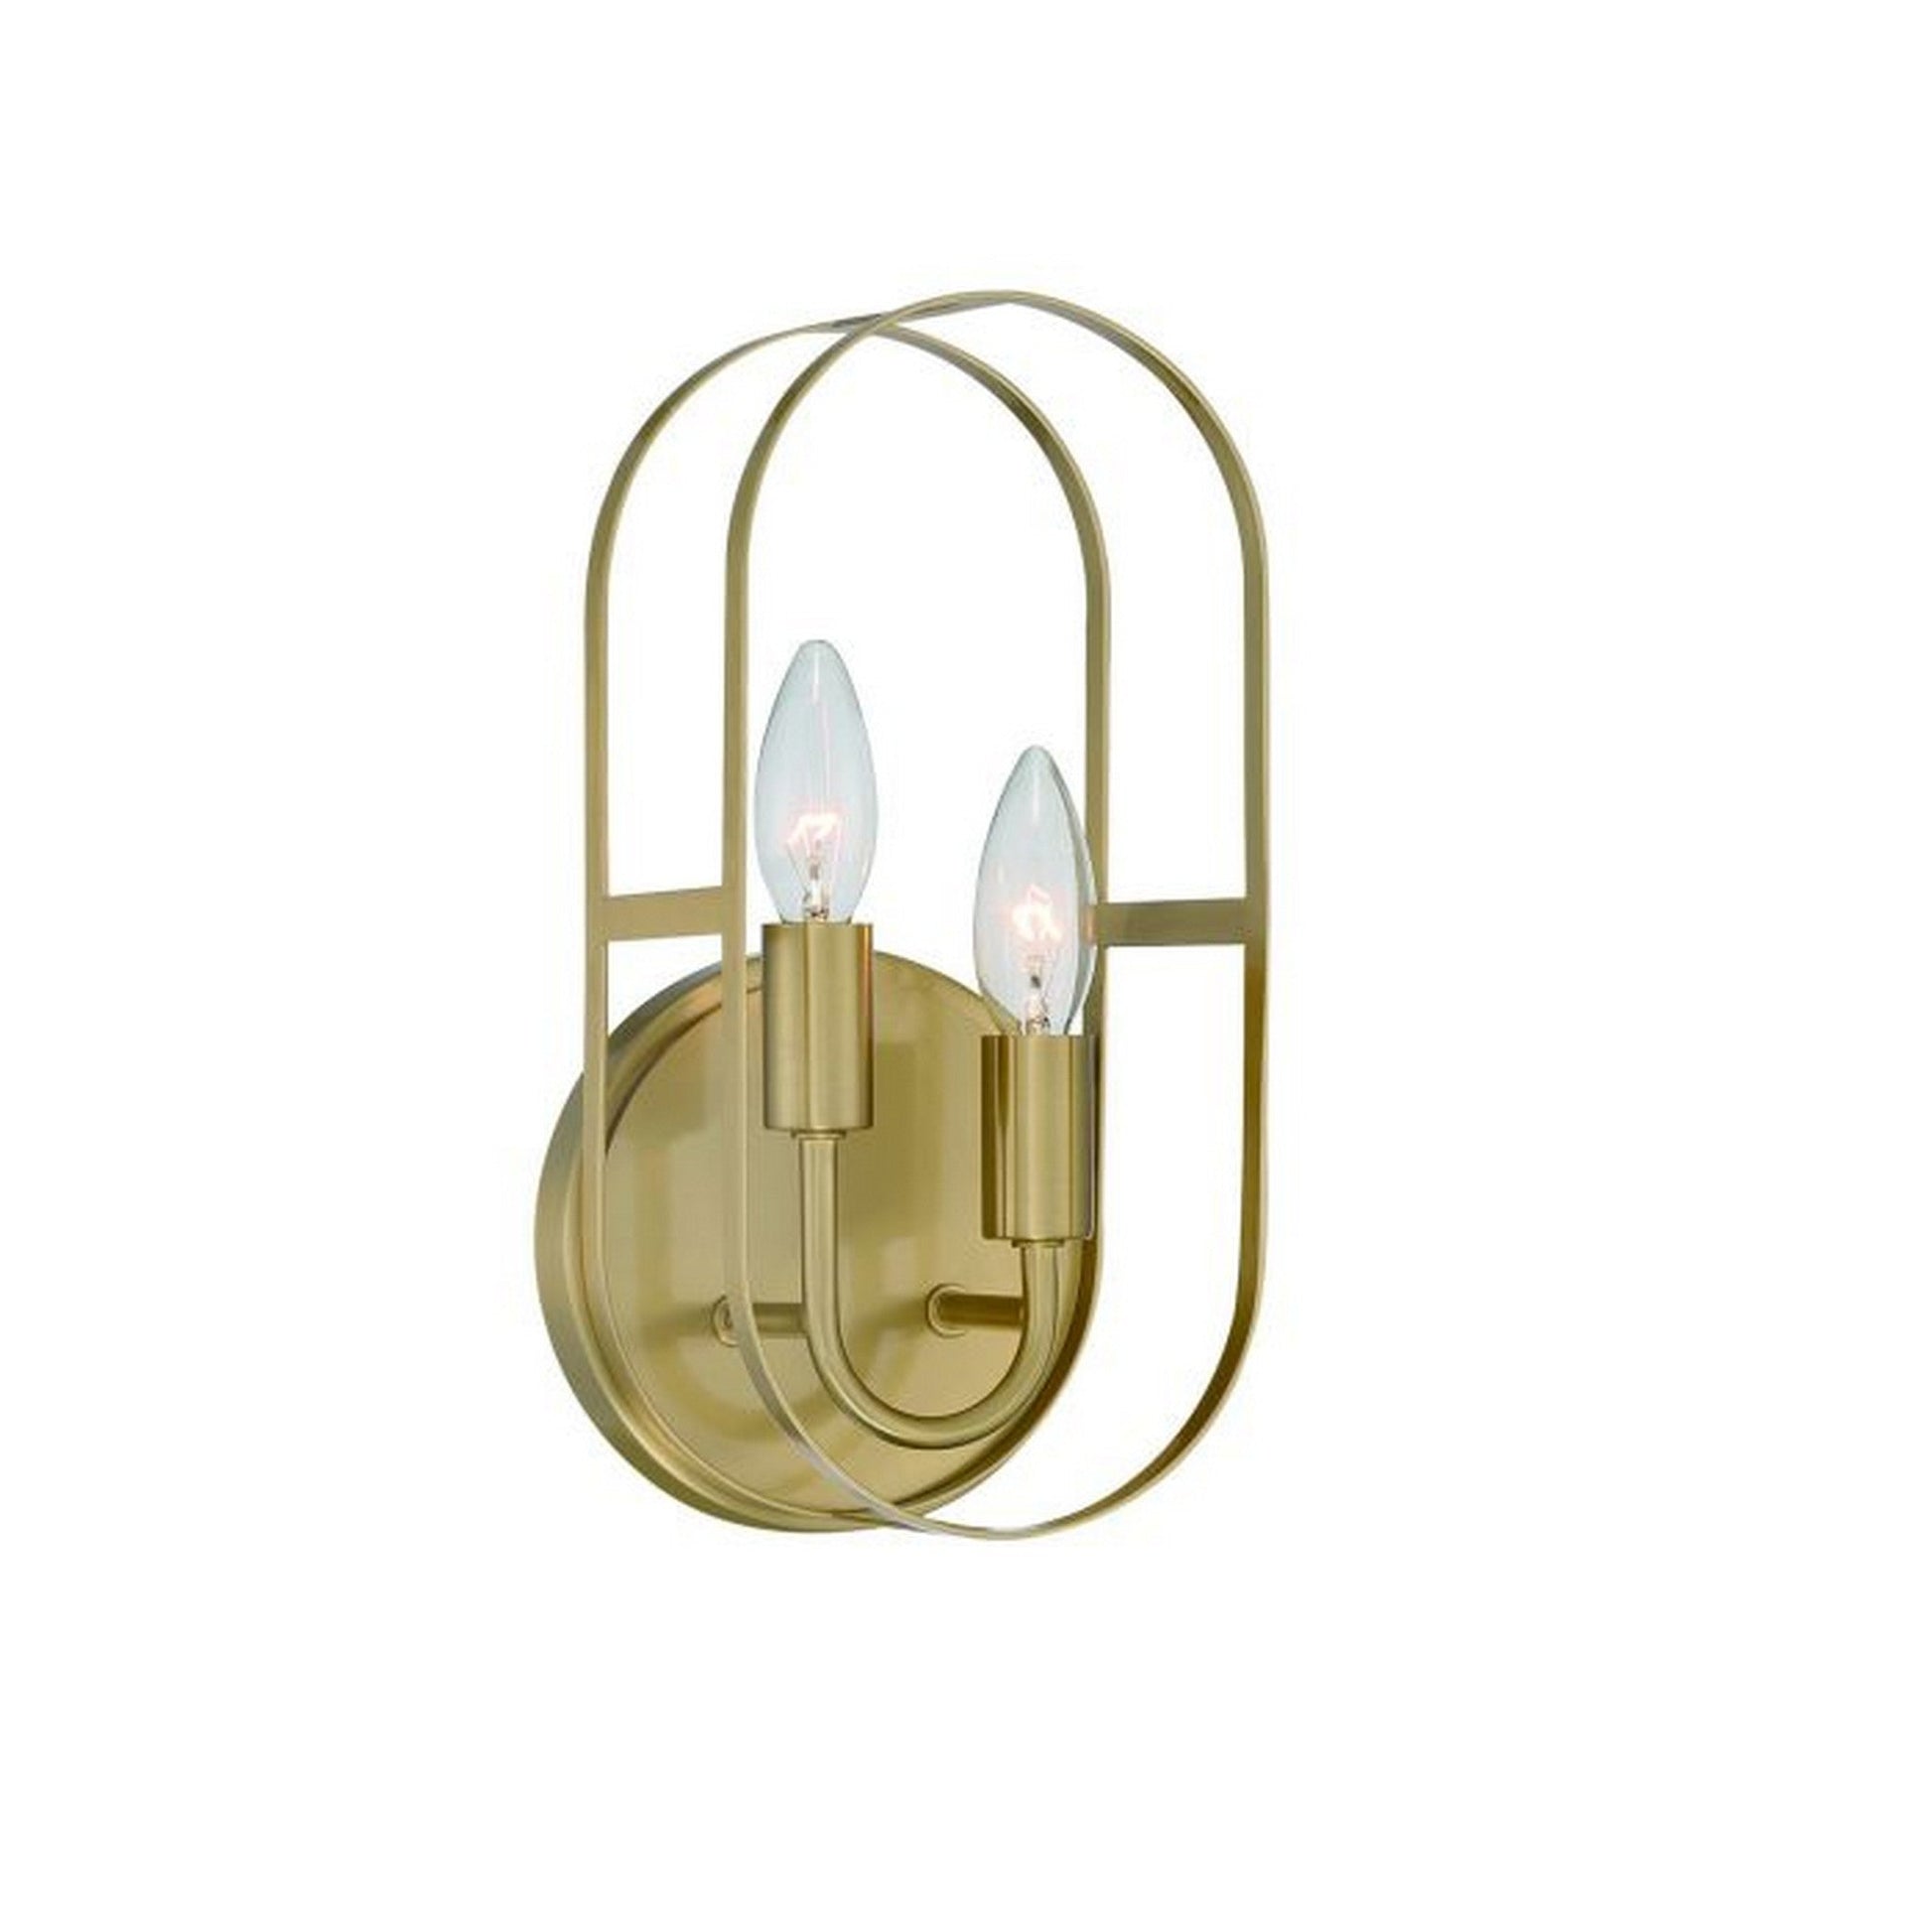 Craftmade Mindful 6" x 12" 2-Light Satin Brass Wall Sconce With Arched Metal Frames